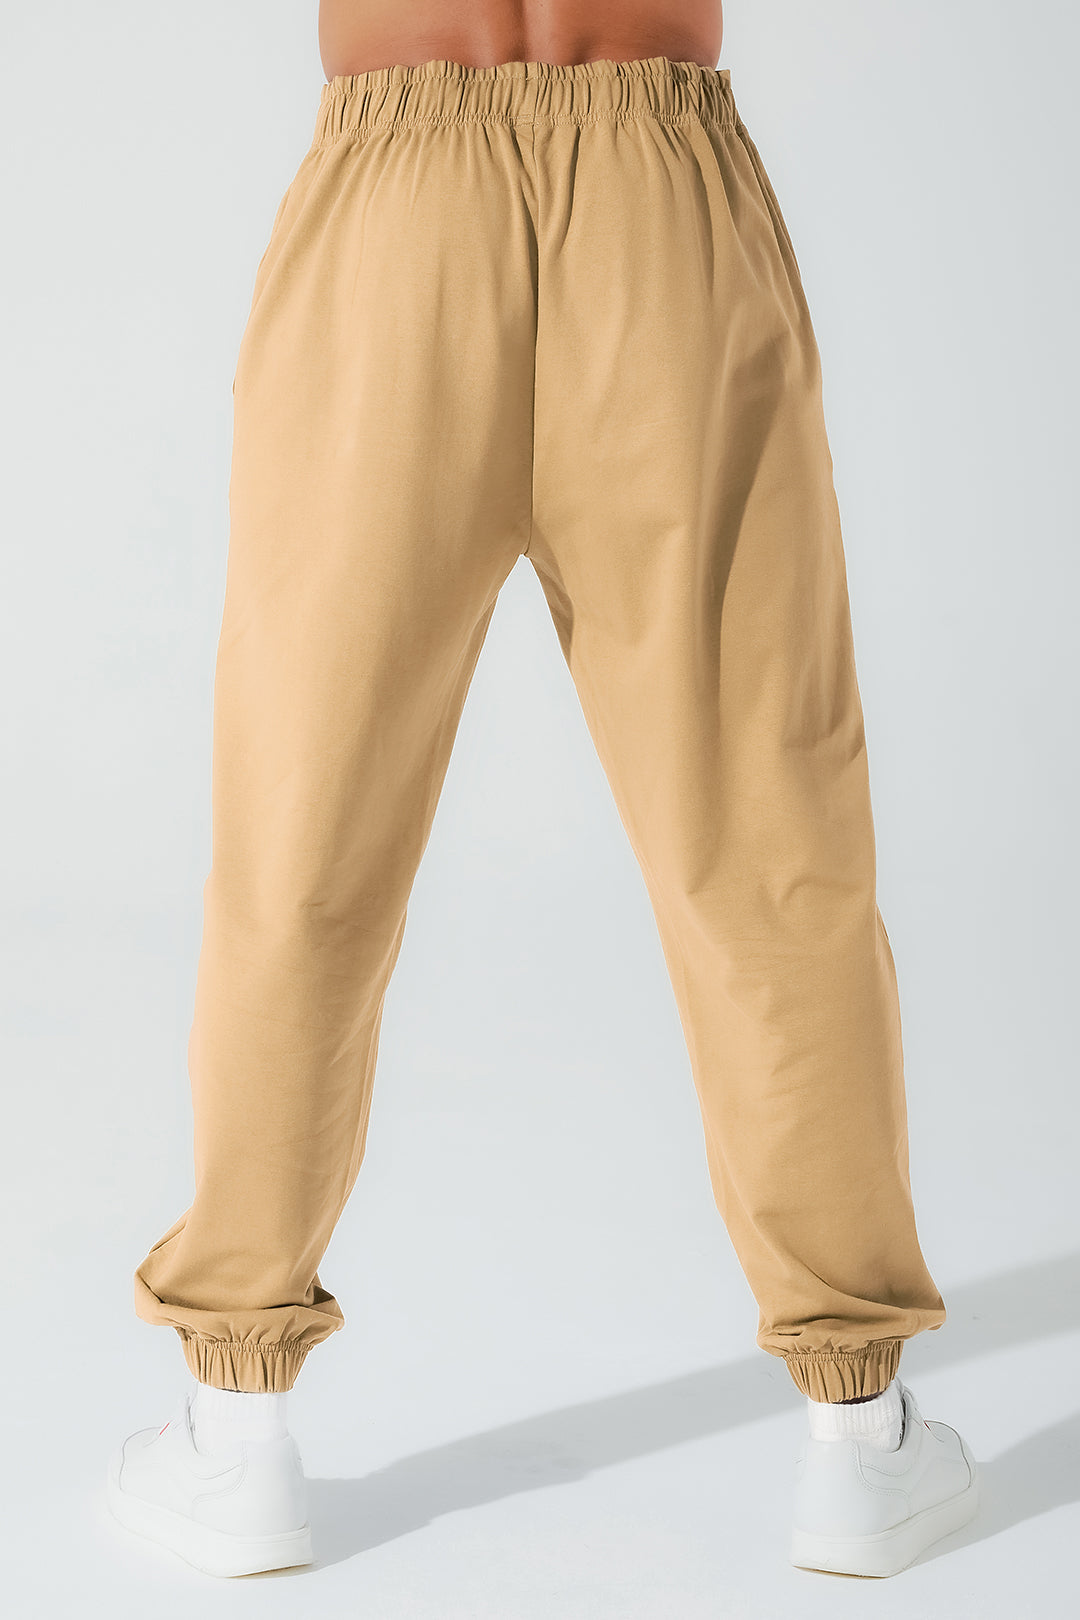 Janet men's cappuccino beige sweatpants, stylish and comfortable trousers for men - OW-0034-MTR-BG_3.jpg